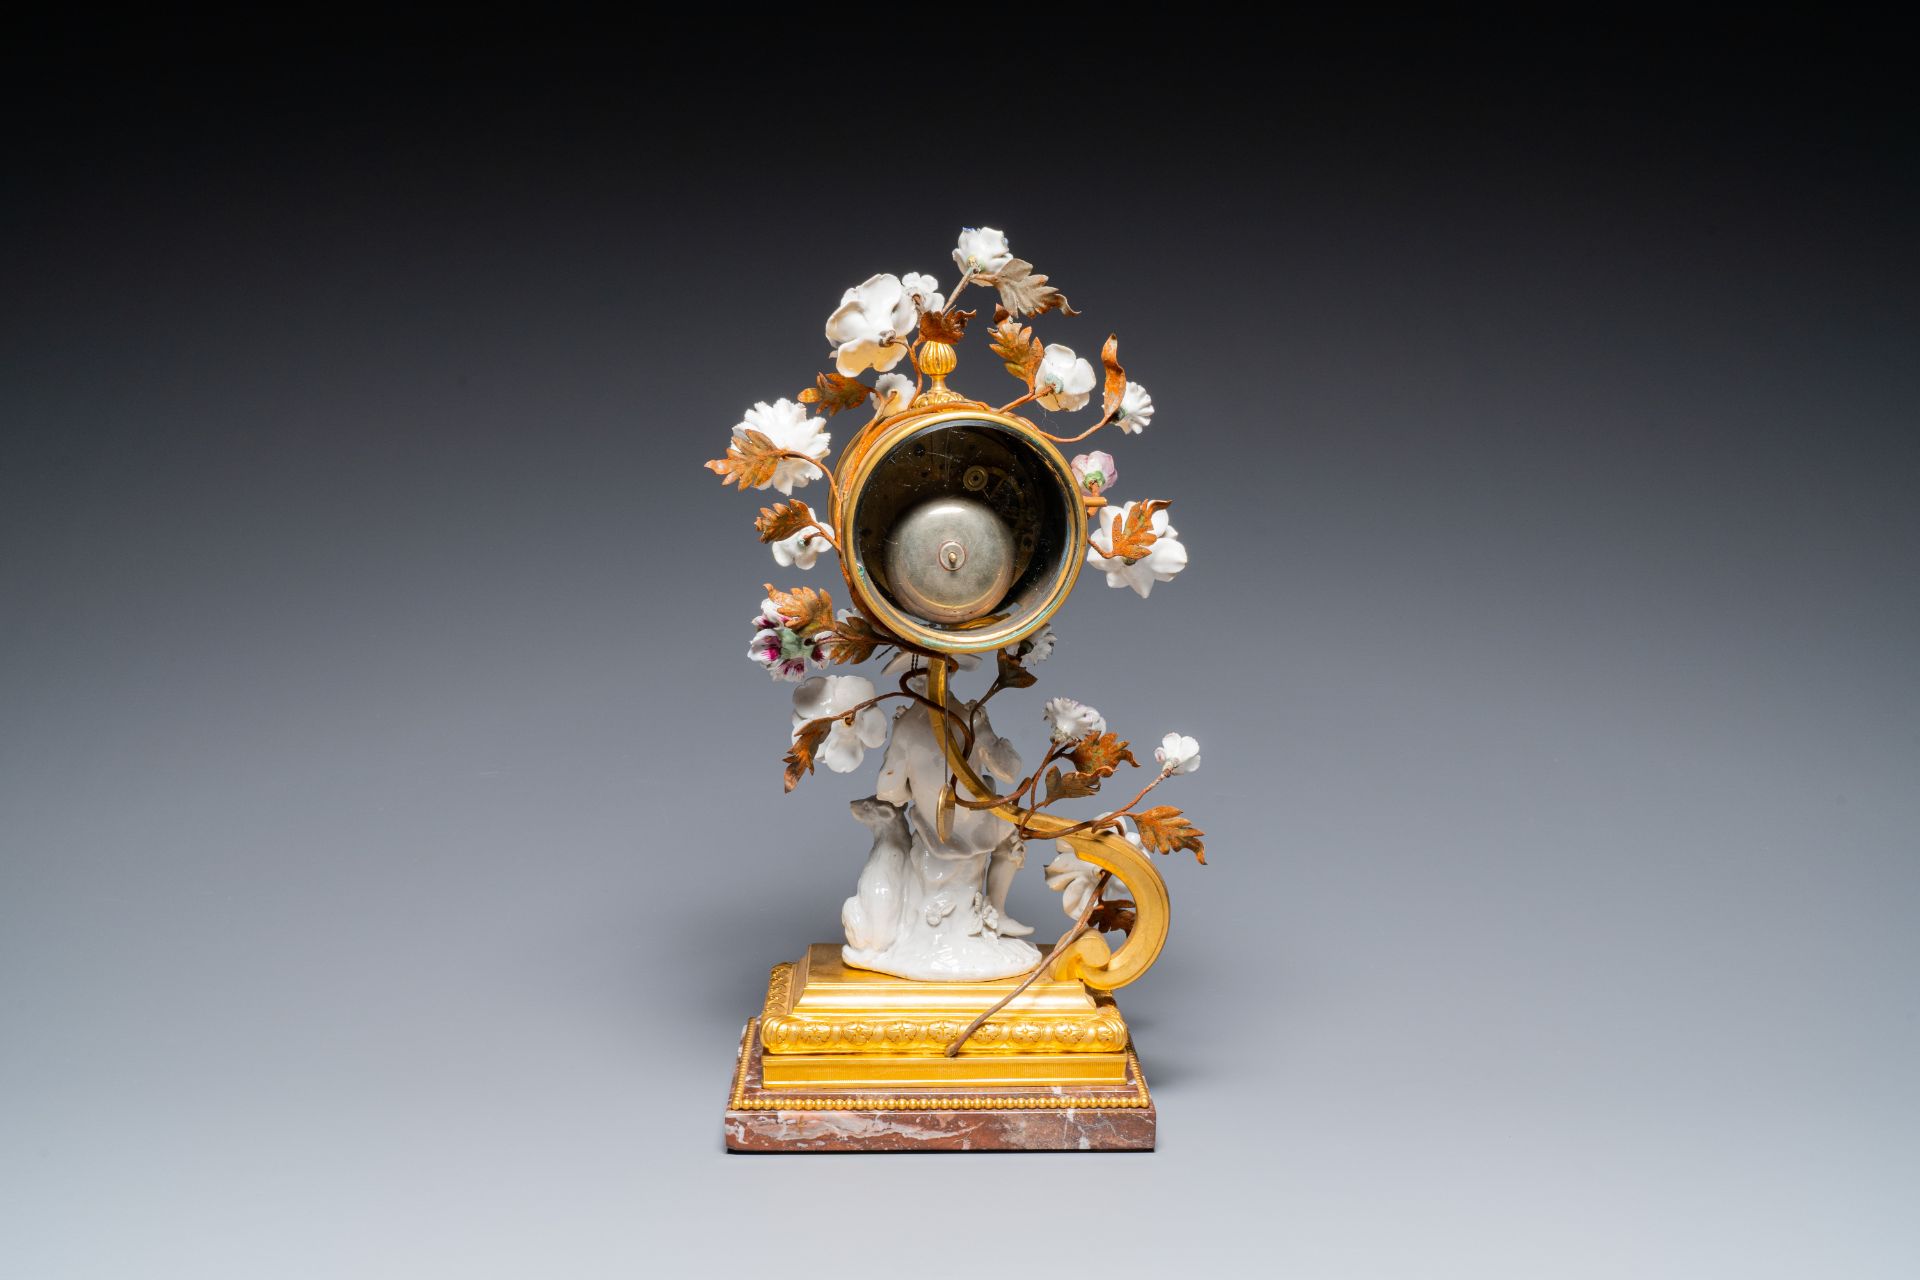 A French ormolu-mounted porcelain mantel clock, 18/19th C. - Image 8 of 28